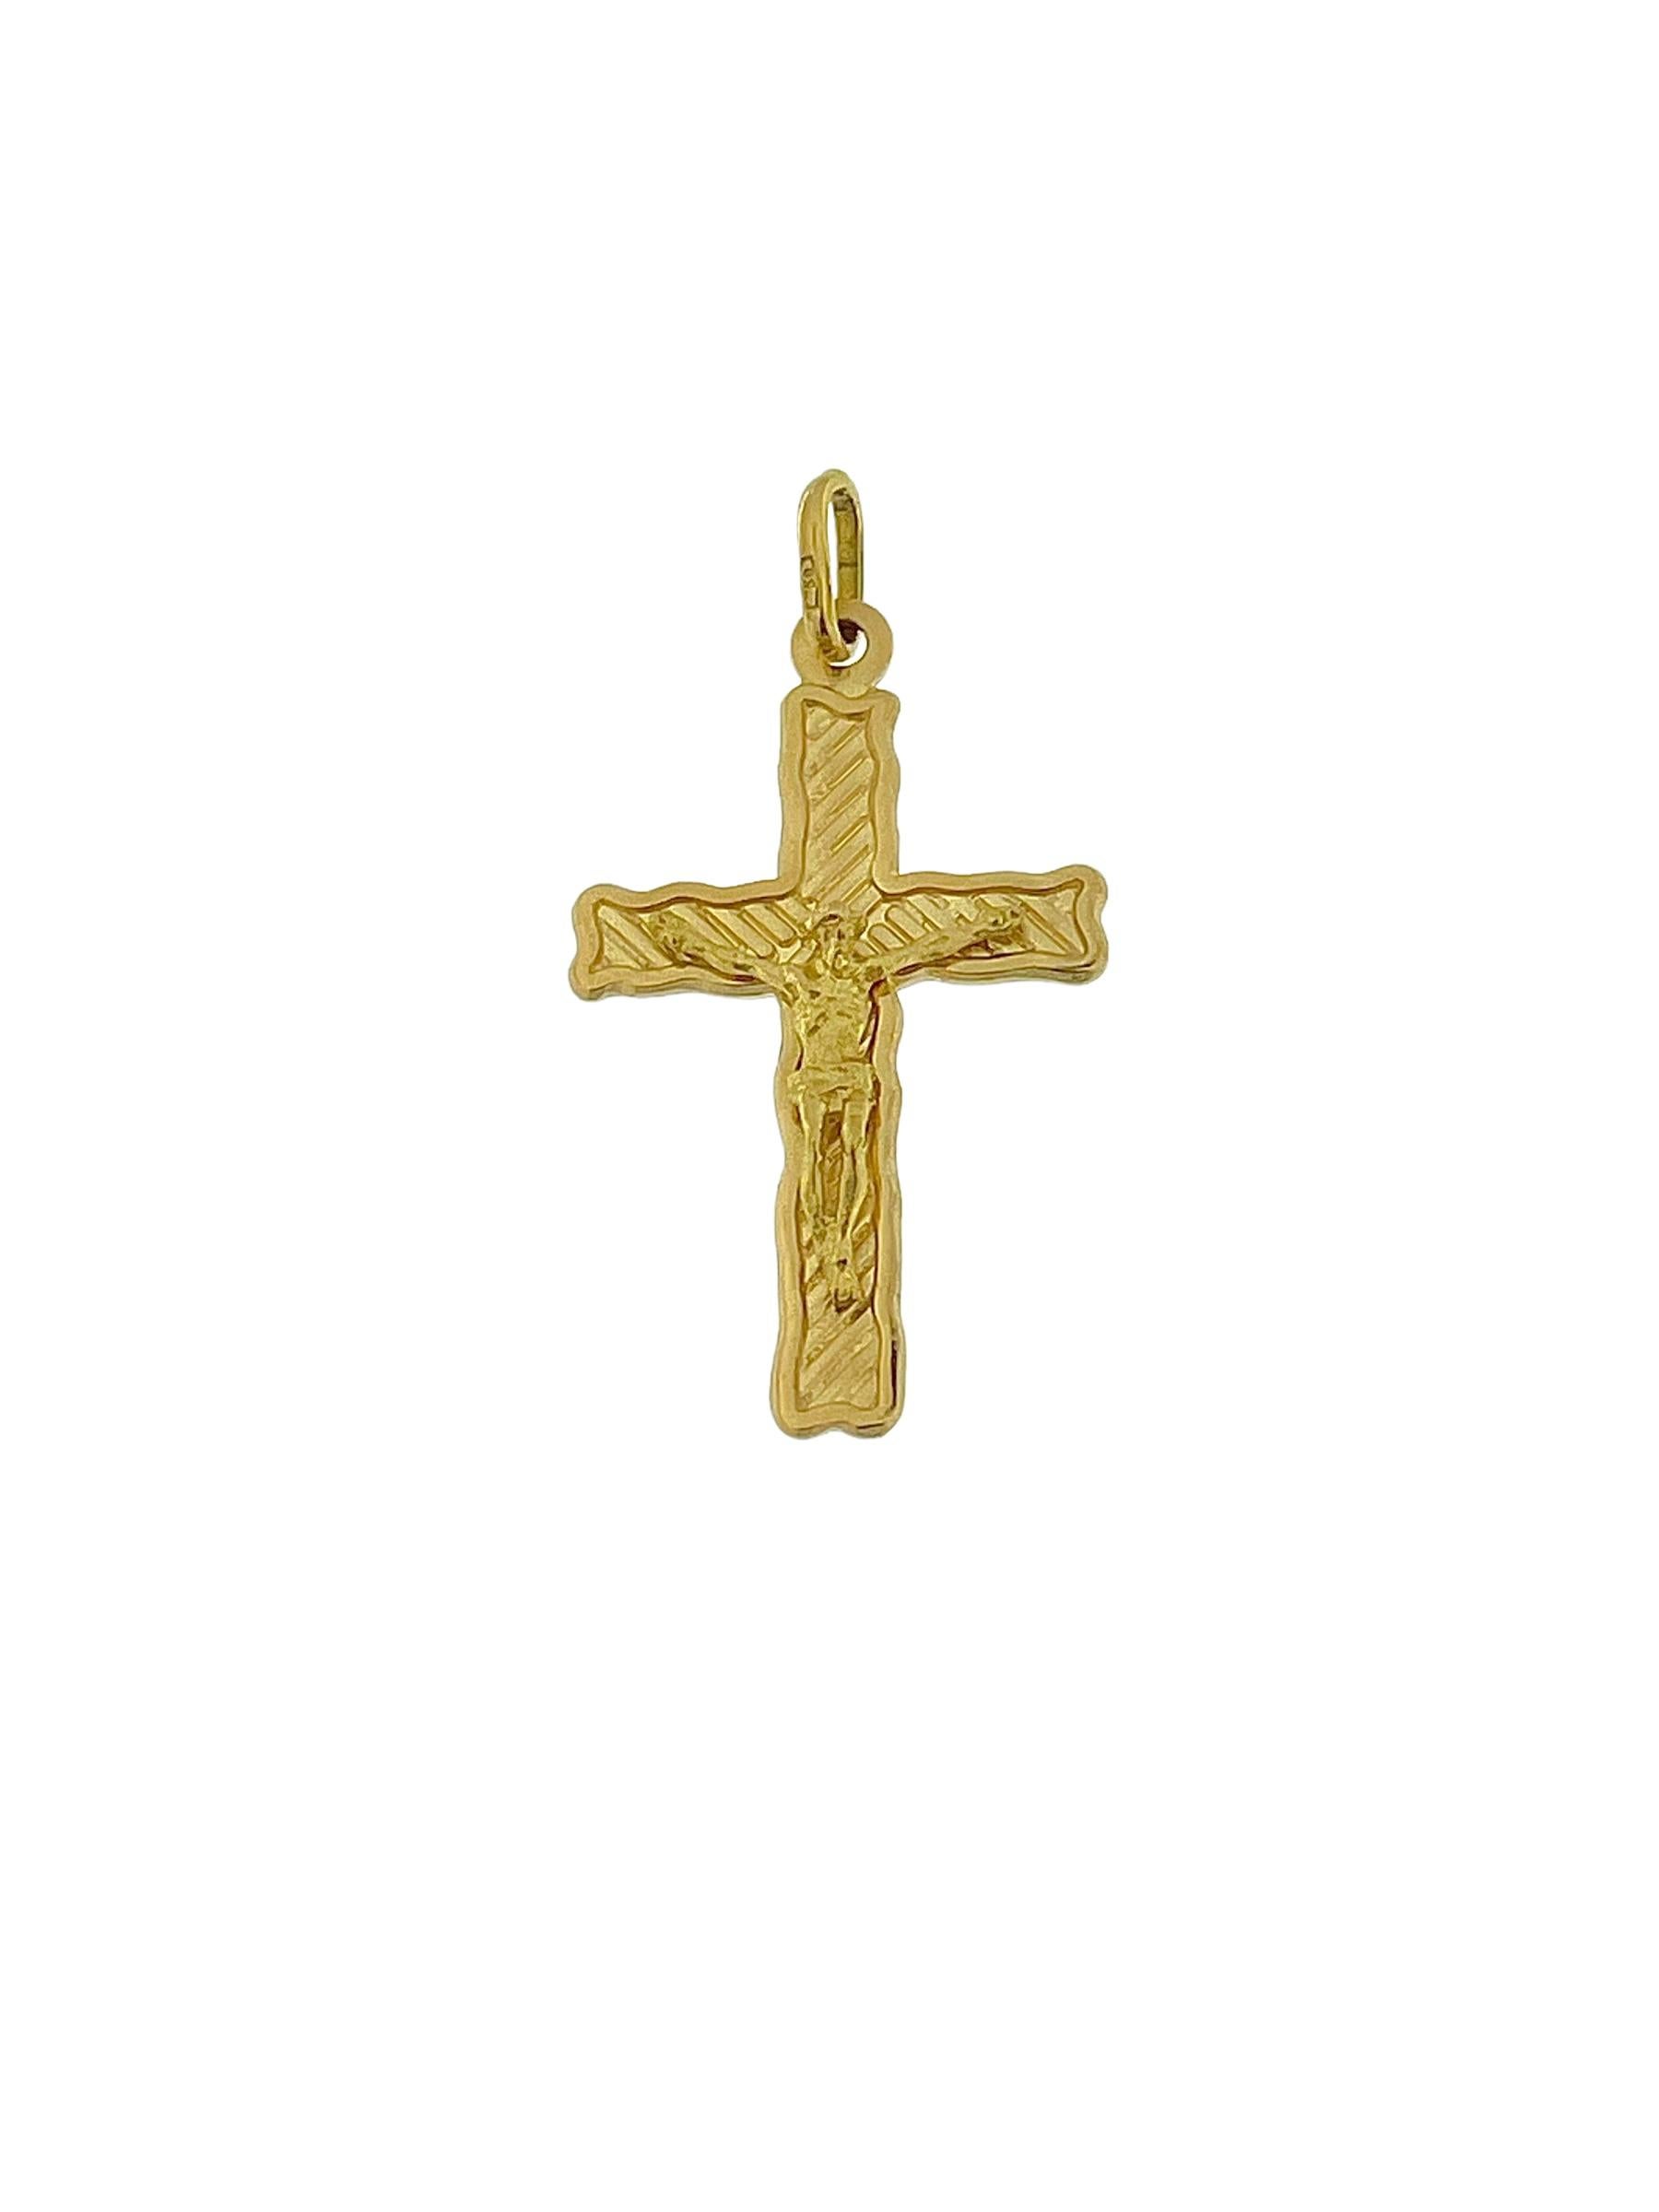 This Vintage Italian Crucifix is a remarkable piece of jewelry that exudes a sense of history and reverence. Crafted from luxurious 18-karat yellow gold, the crucifix features a satin finish that adds a subtle, elegant sheen to the piece.

The